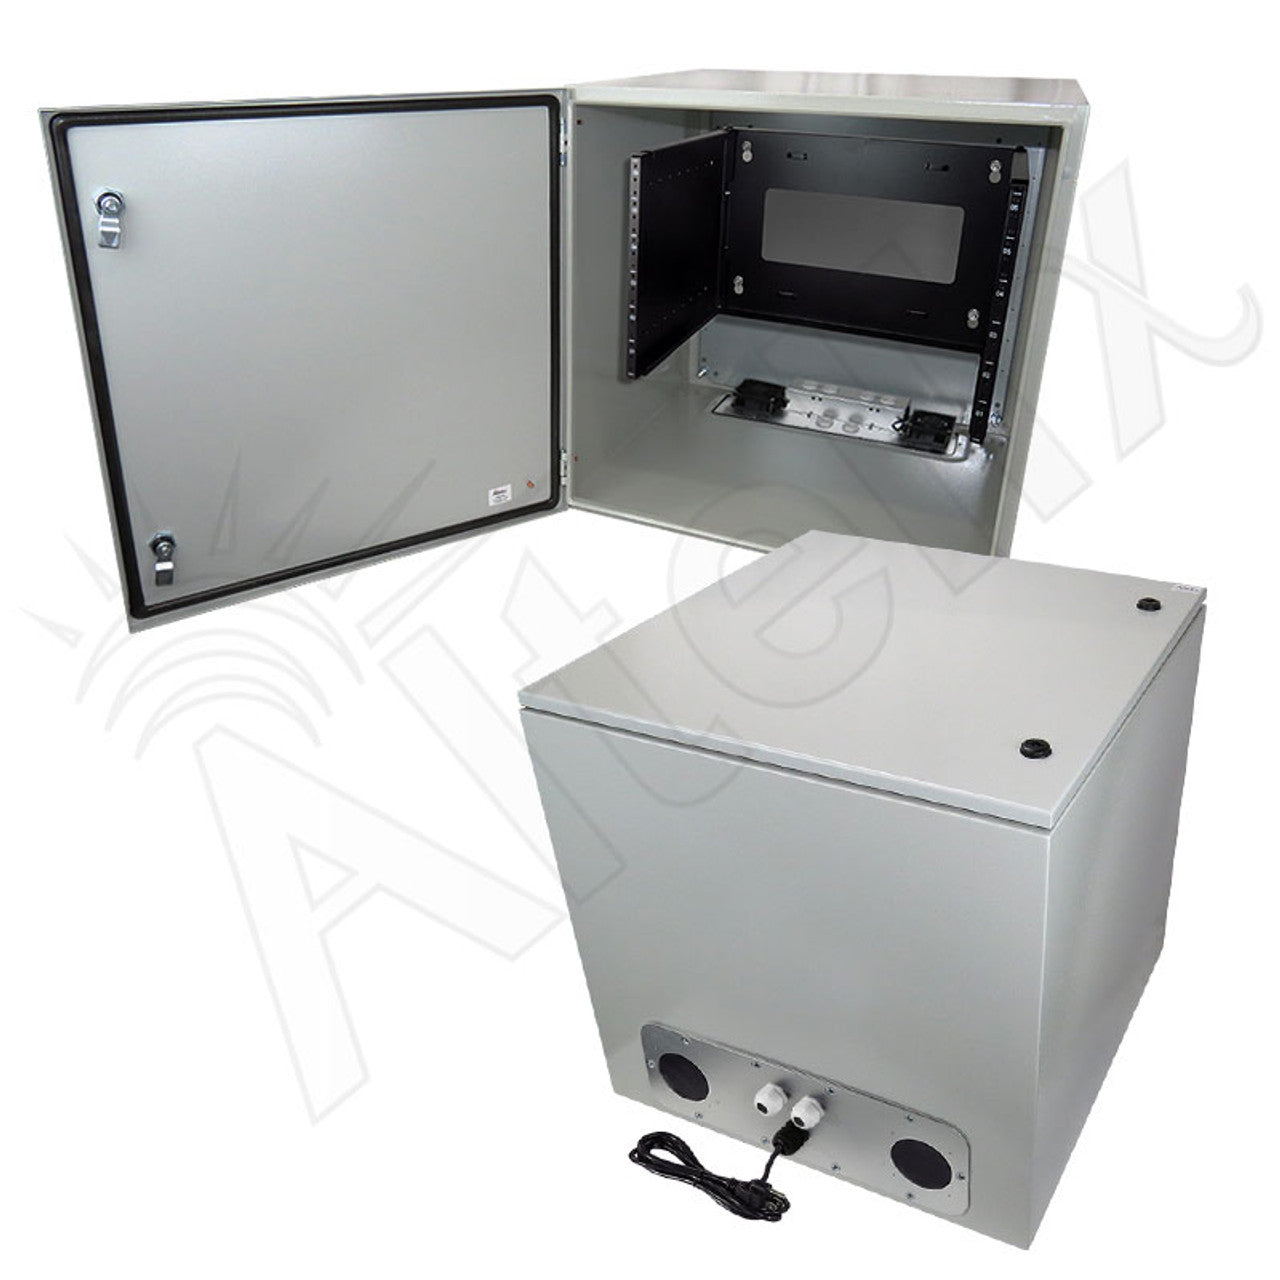 Altelix 19" Wide 6U Rack Steel Weatherproof NEMA Enclosure with Dual Cooling Fans, 120 VAC Outlets and Power Cord